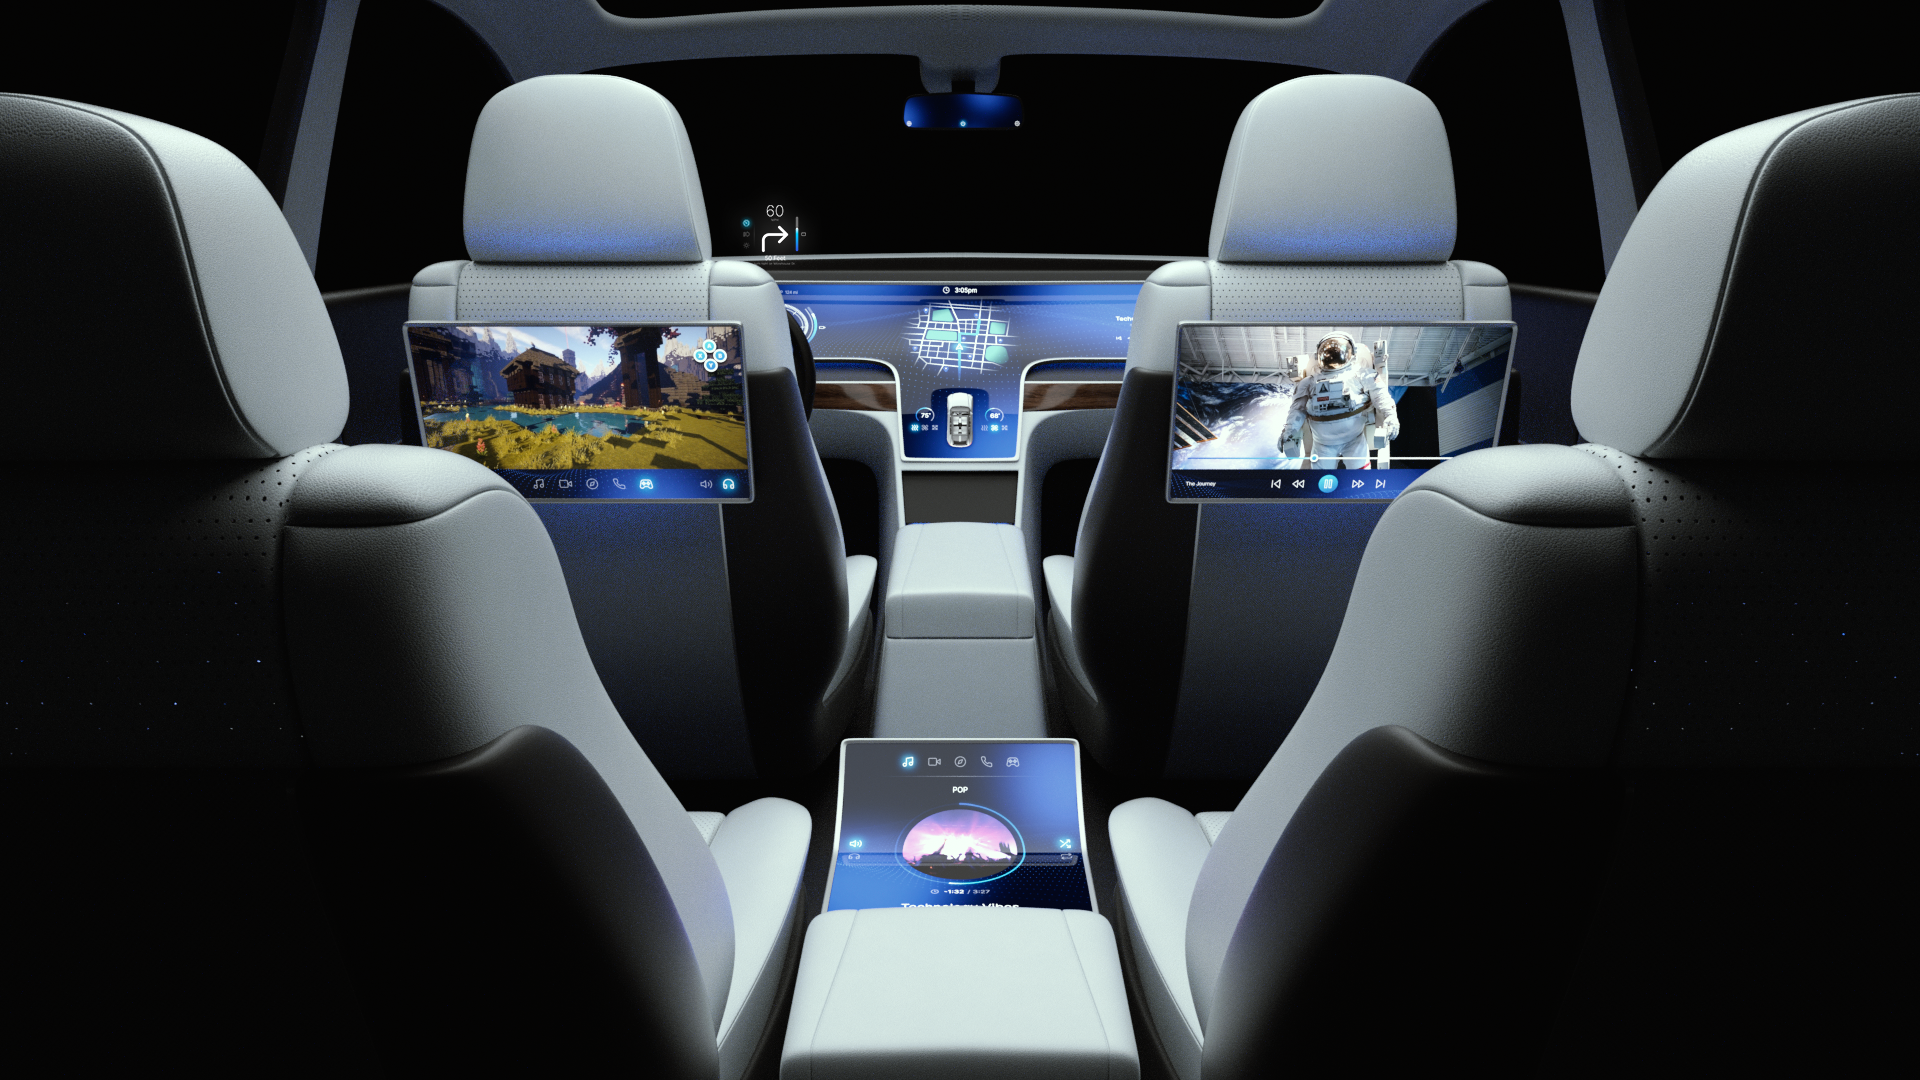 Qualcomm's Snapdragon Digital Chassis render showing advanced connected infotainment system in vehicle